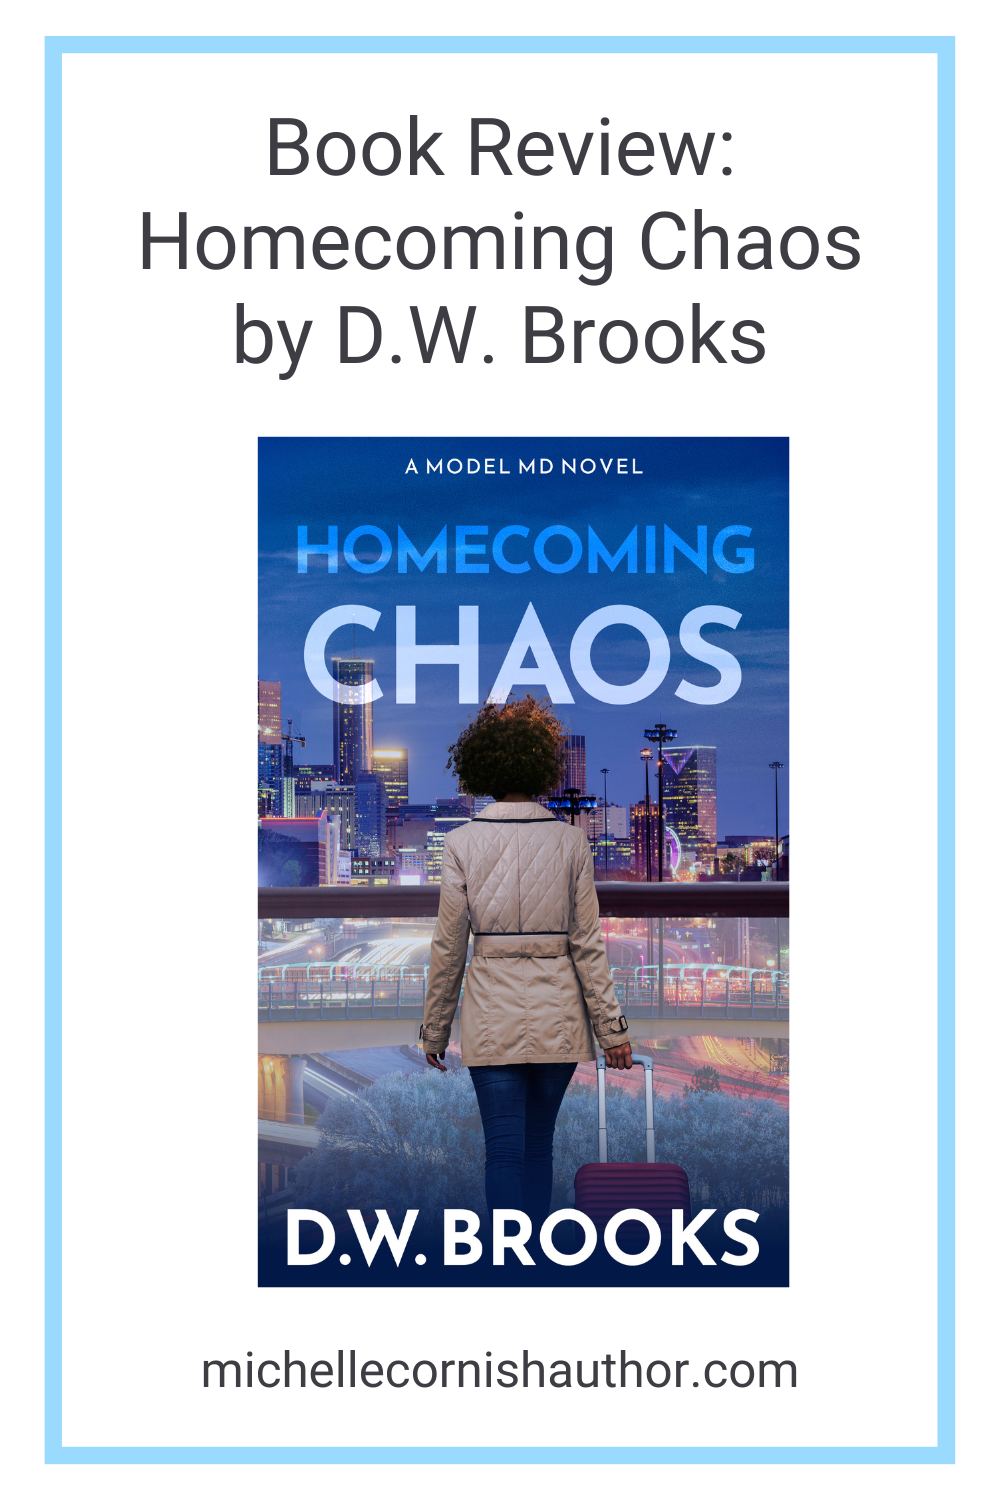 Book Review of Homecoming Chaos by D.W. Brooks